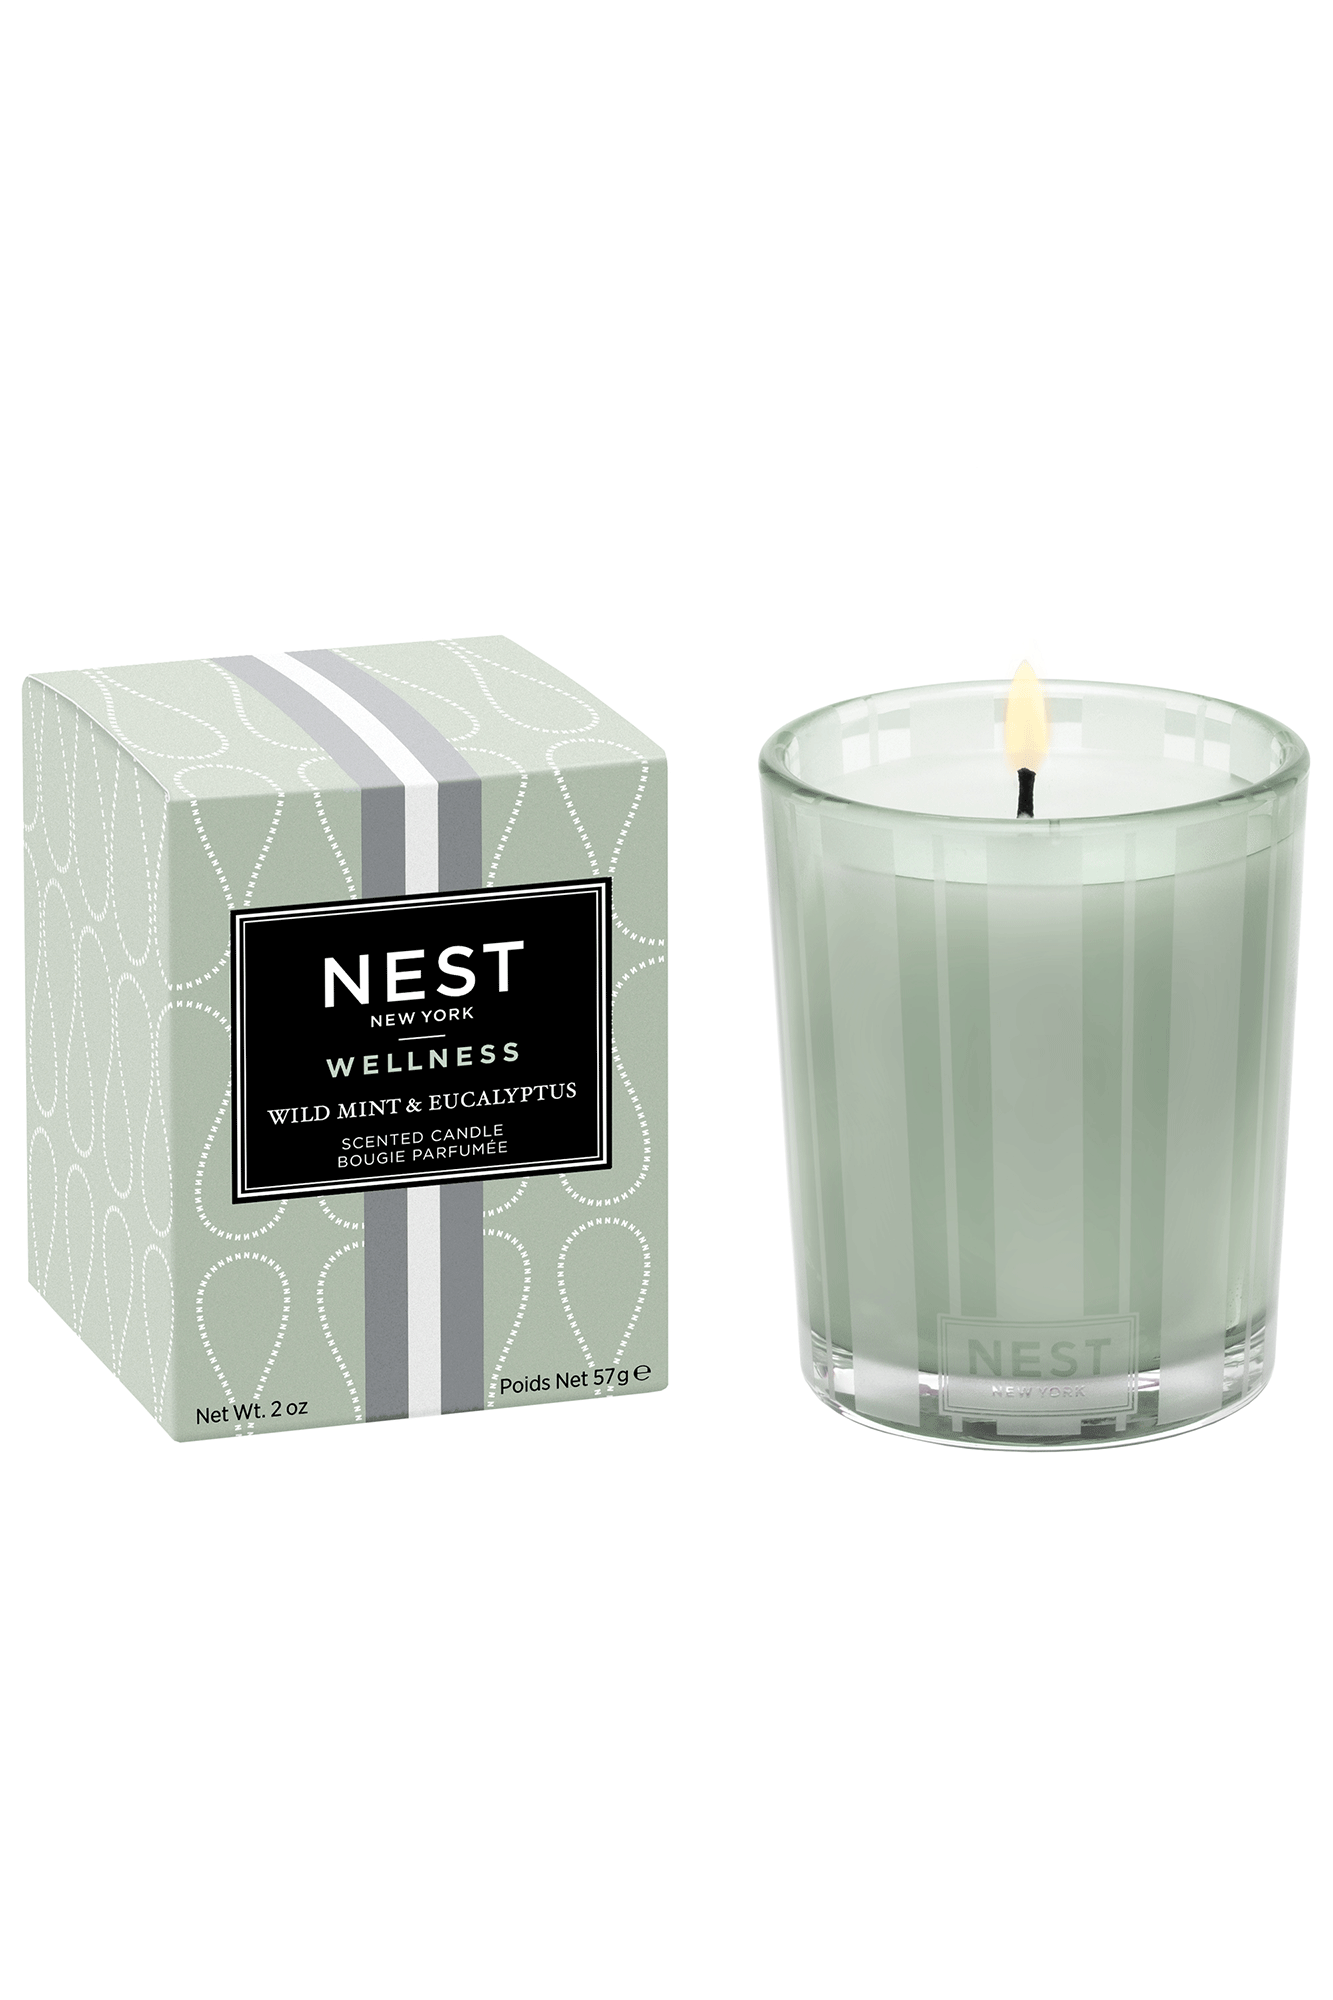 Clear your mind and awaken your senses with the Wild Mint & Eucalyptus Votive Candle from Nest. Its blend of wild mint, eucalyptus, basil and Thai ginger creates a calming atmosphere that’s perfect for your sanctuary. Light it up for a soothing scent and mood booster!